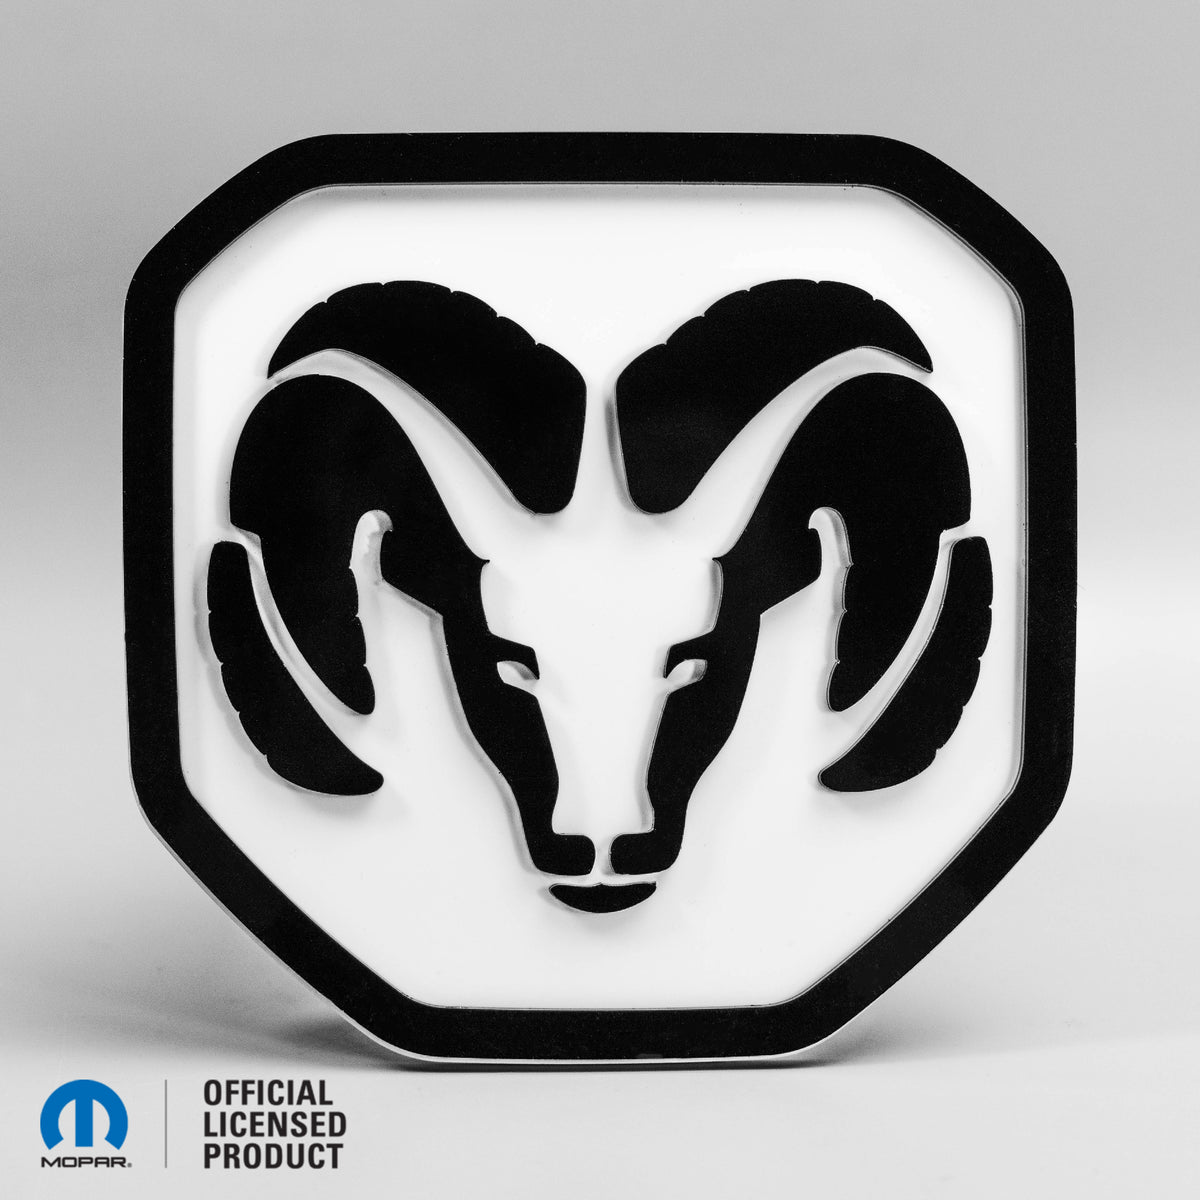 RAM® Head Logo Style 2 Tailgate Badge - Fits 2019+ RAM® Tailgate - 1500, 2500, 3500 - Gloss on White - Officially Licensed Product